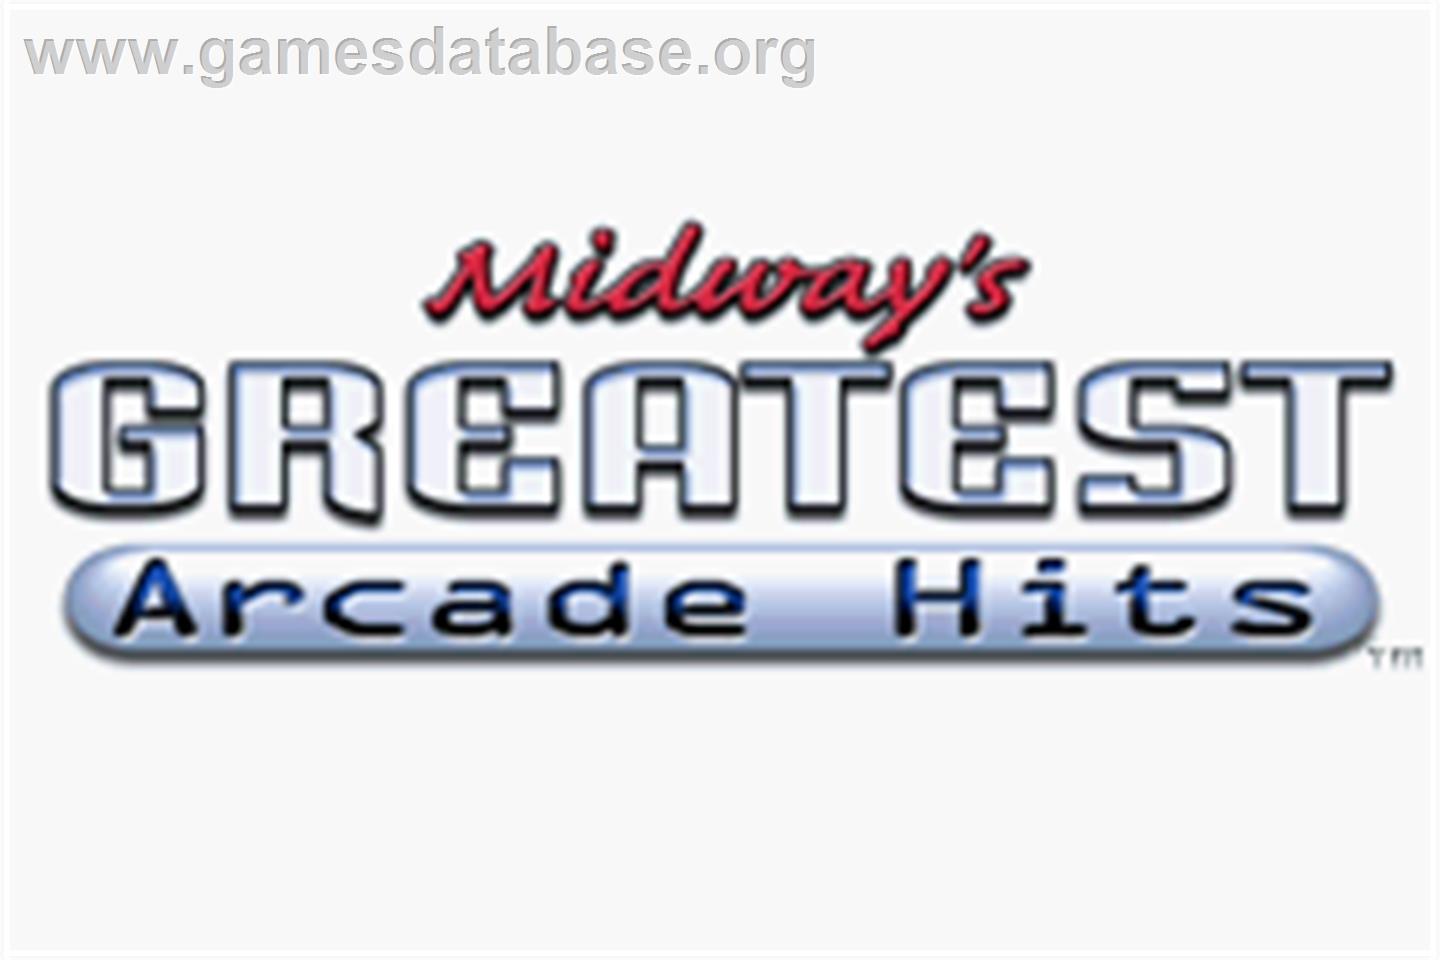 Midway's Greatest Arcade Hits - Nintendo Game Boy Advance - Artwork - Title Screen